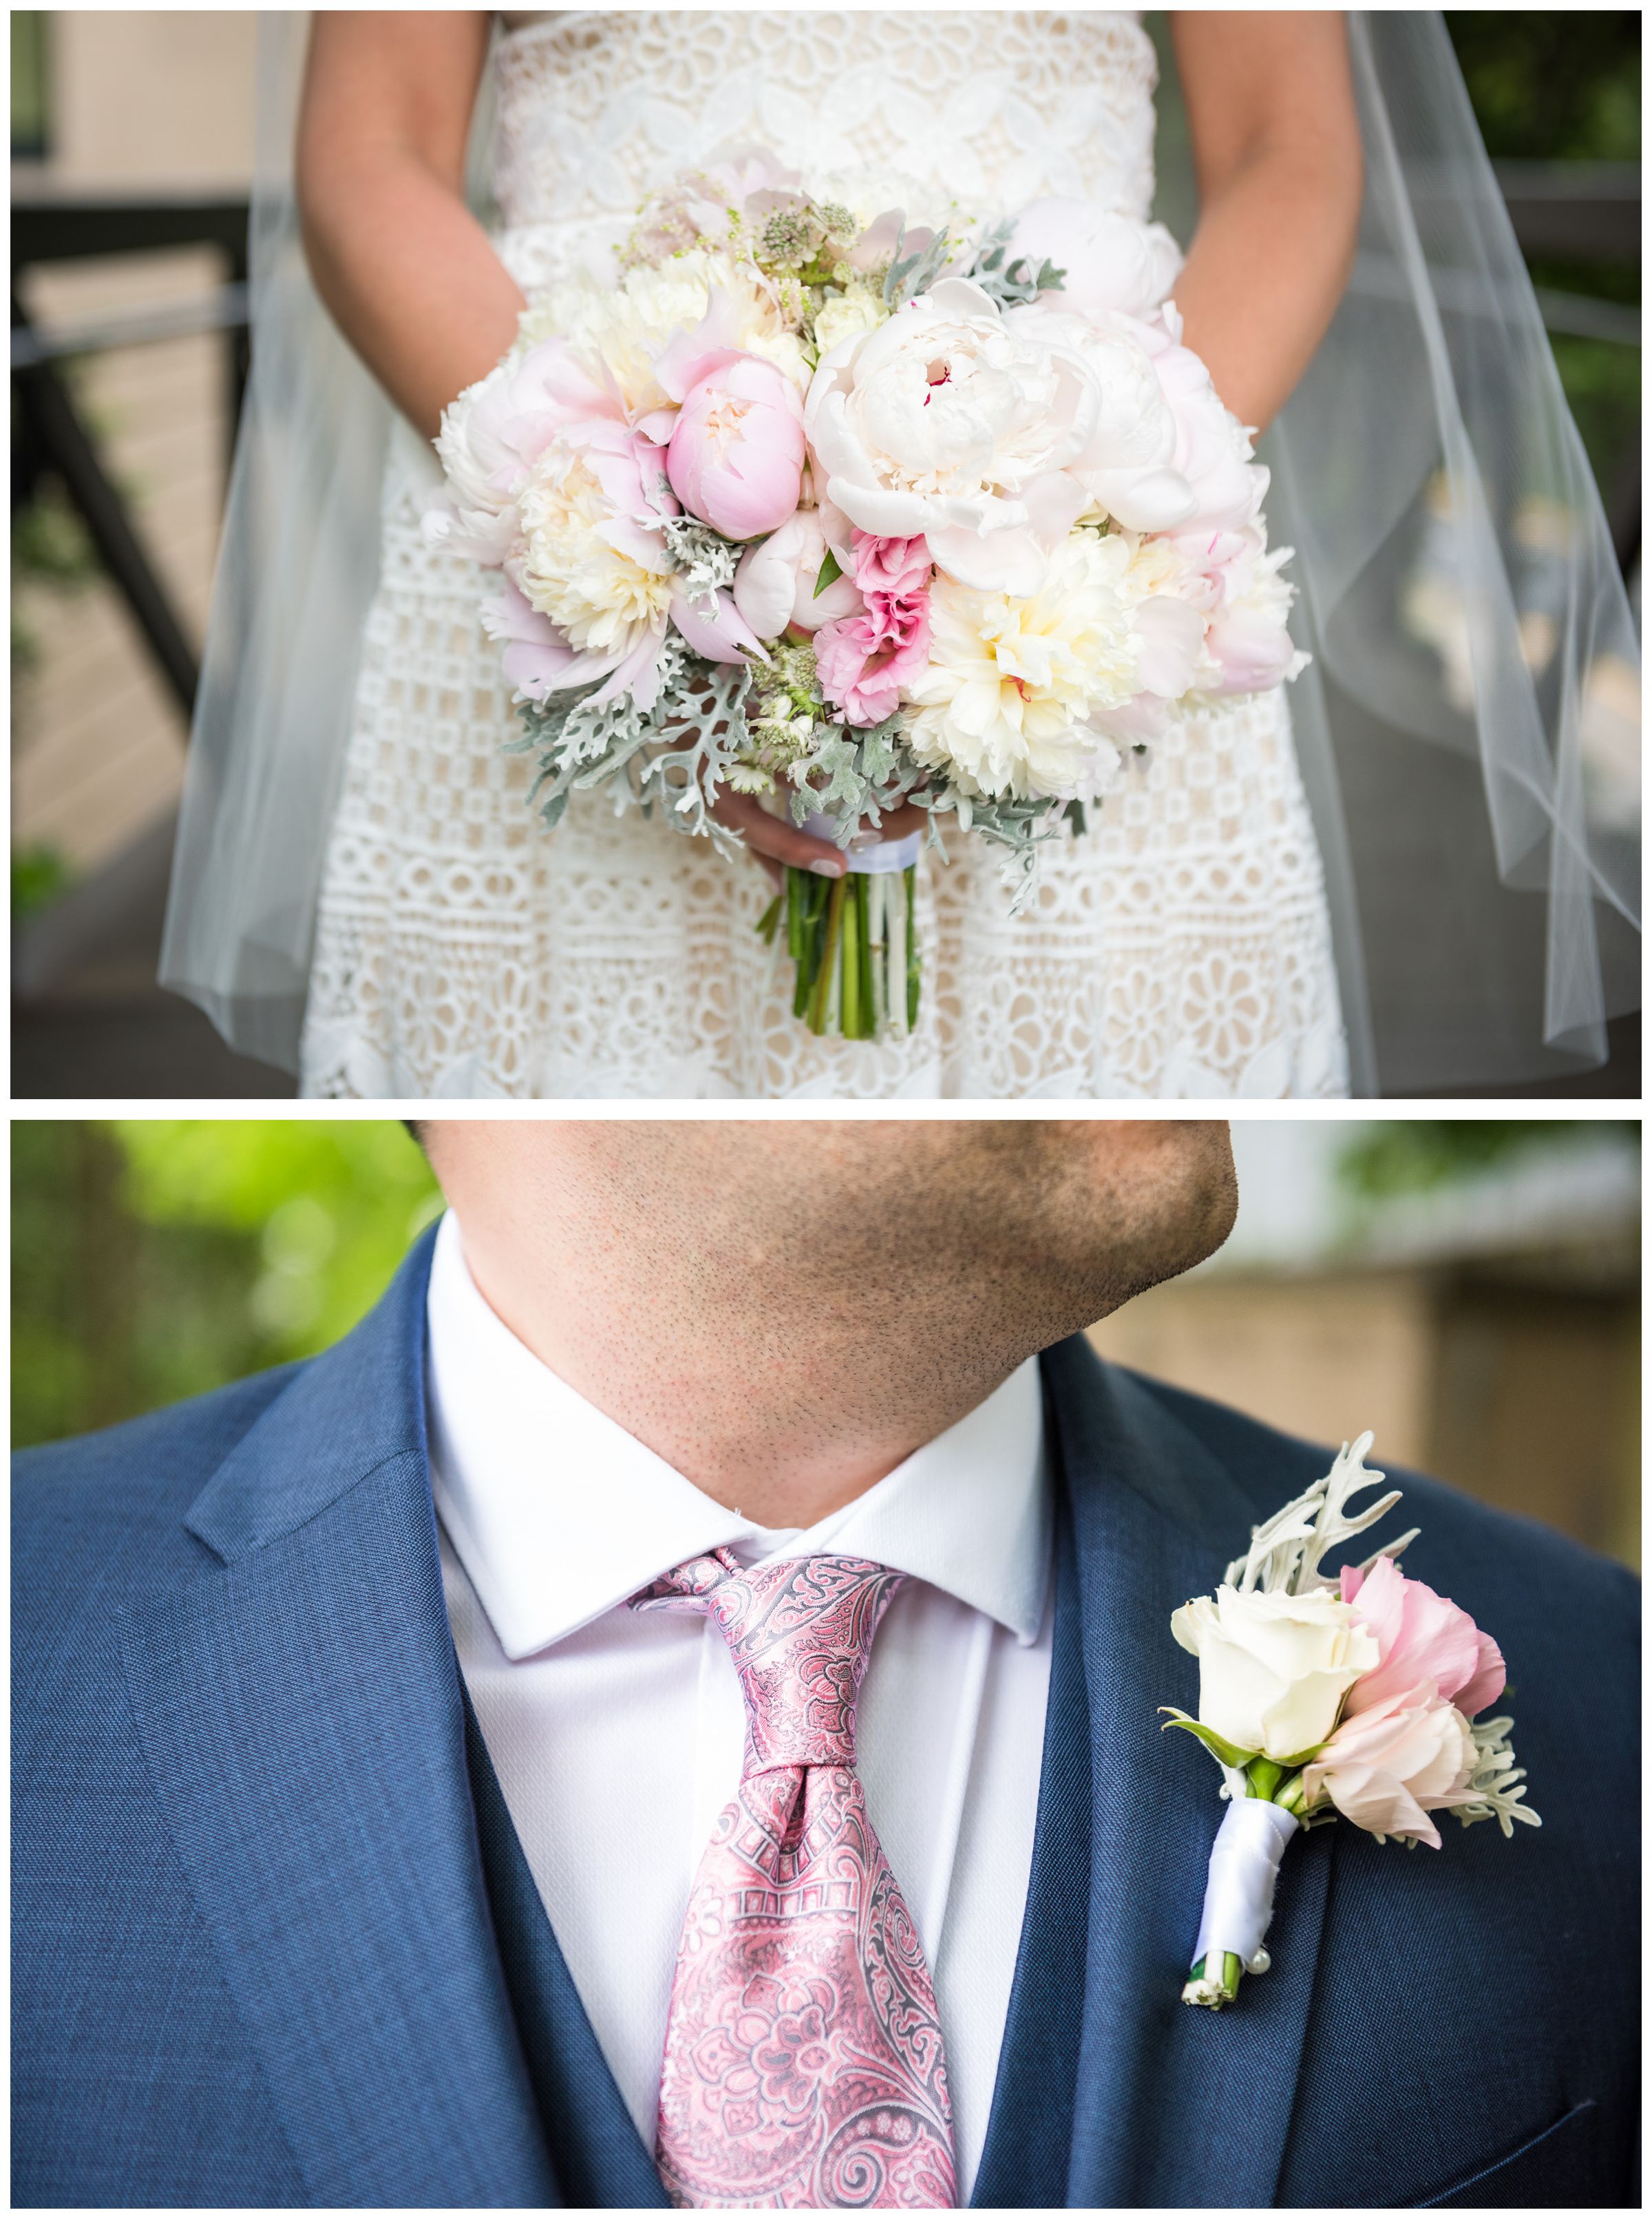 navy and blush wedding accessories including navy Tommy Hilfiger suit, blush tie, and blush peony bouquet